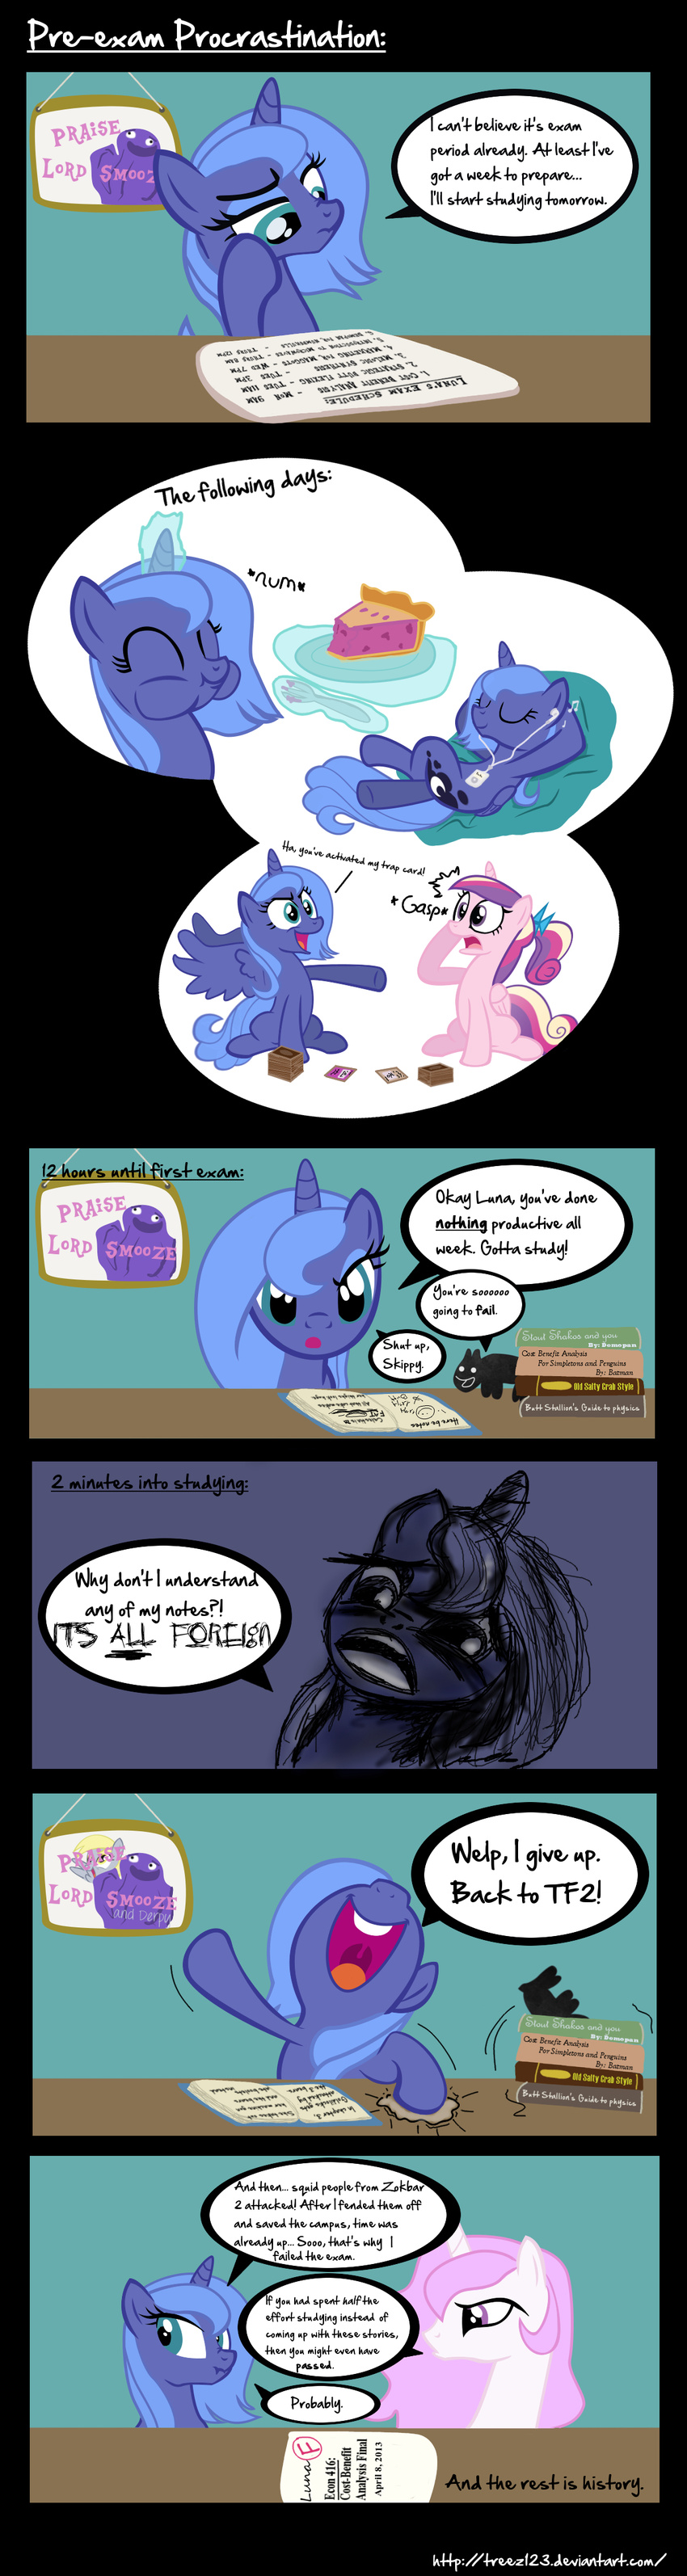 apple_inc. bean_bag blonde_hair blue_eyes blue_hair book card chair comic cutie_mark derpy_hooves_(mlp) desk dialog duel english_text equine female feral fork friendship_is_magic fur grey_fur hair head_phones headphones horn horse ipod long_hair looking_at_viewer mammal multi-colored_hair my_little_pony open_mouth paper pegasus pie pie_crust pink_hair plain_background plate pony princess princess_cadance_(mlp) princess_celestia_(mlp) princess_luna_(mlp) purple_eyes royalty sigh table text tongue trading_cards treez123 unicorn winged_unicorn wings yellow_eyes young